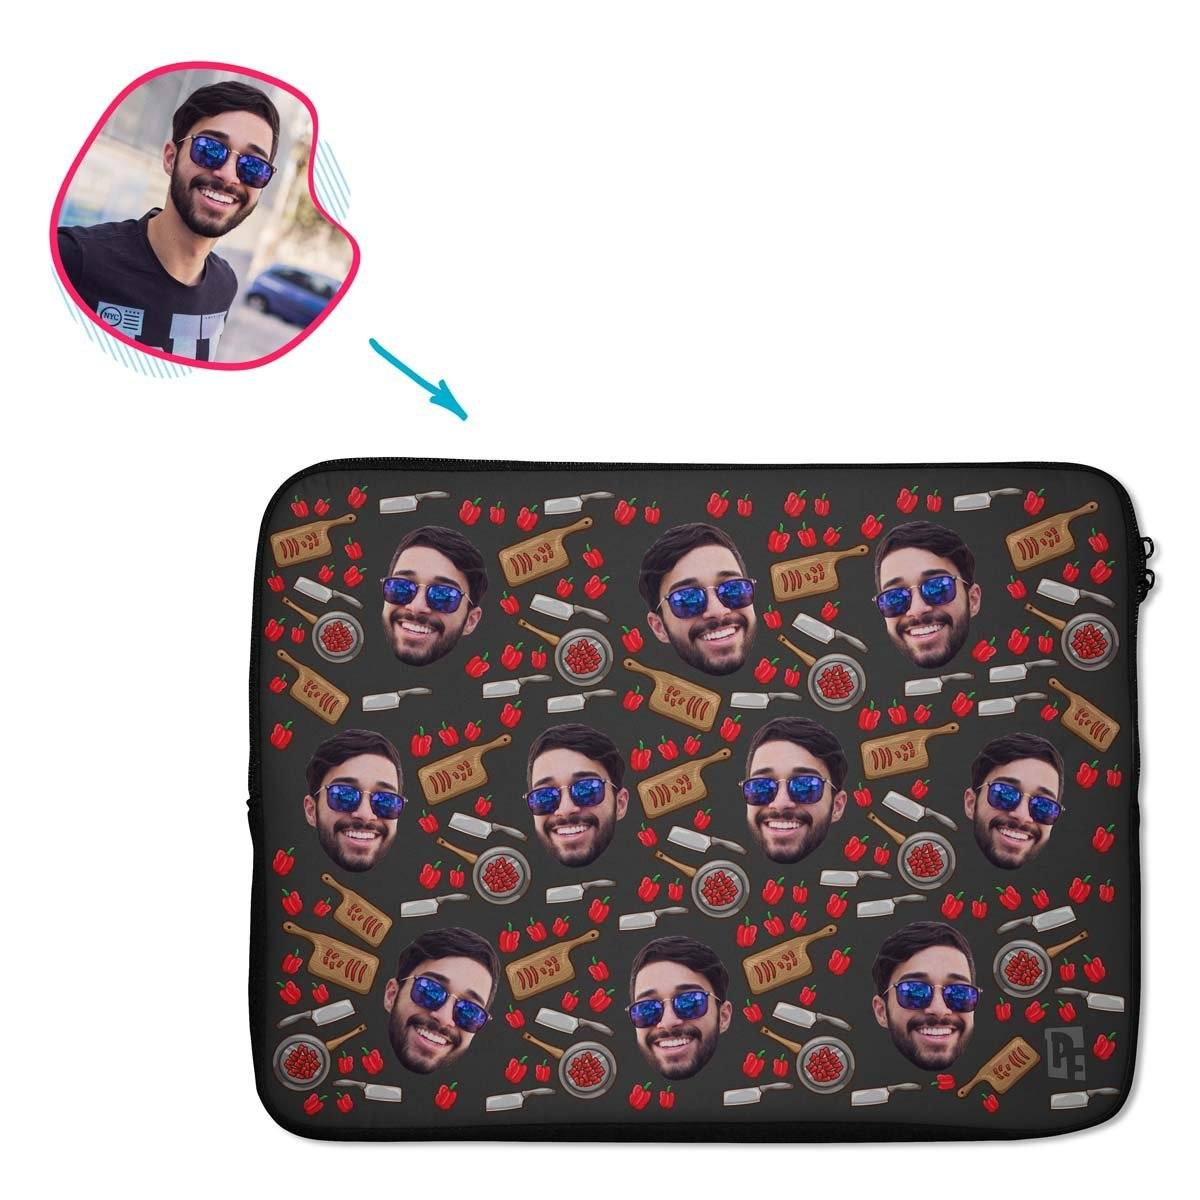 Сooking Personalized Laptop Sleeve